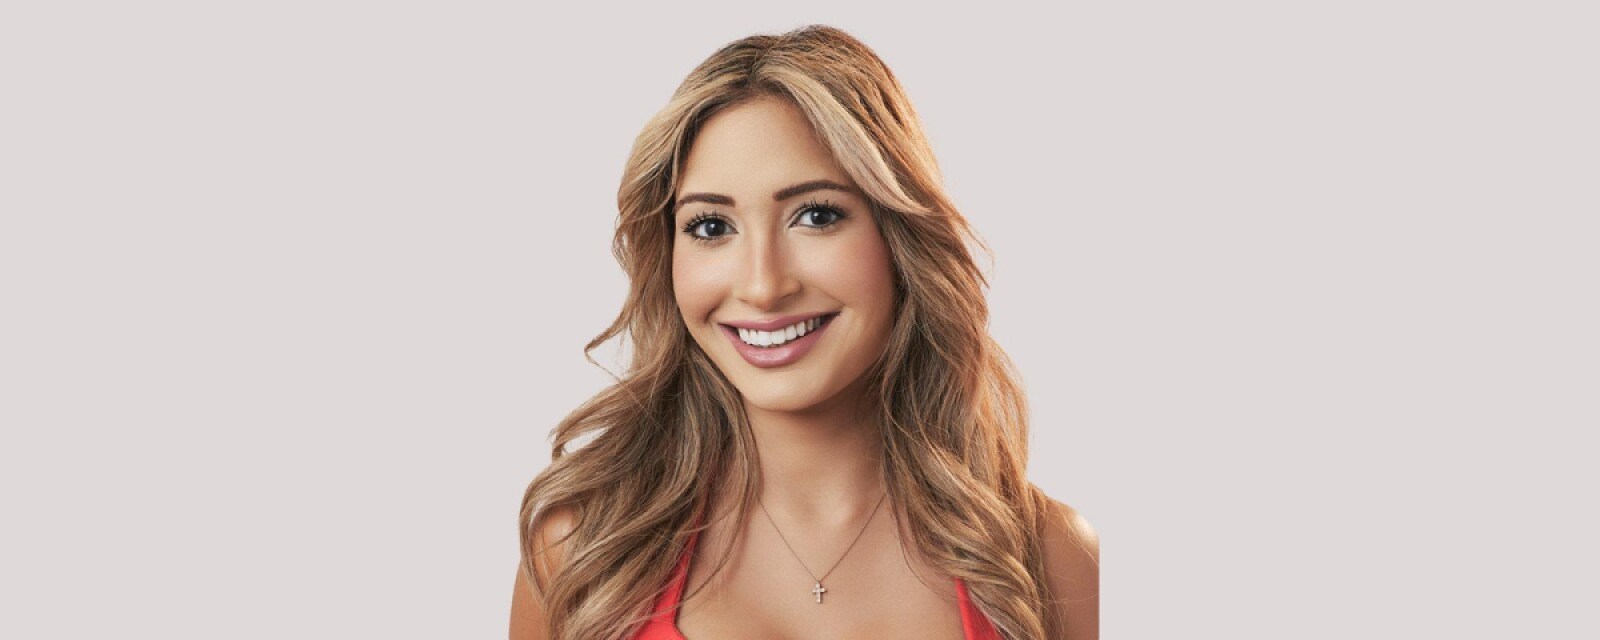 Sonia from 'The Bachelor' season 27